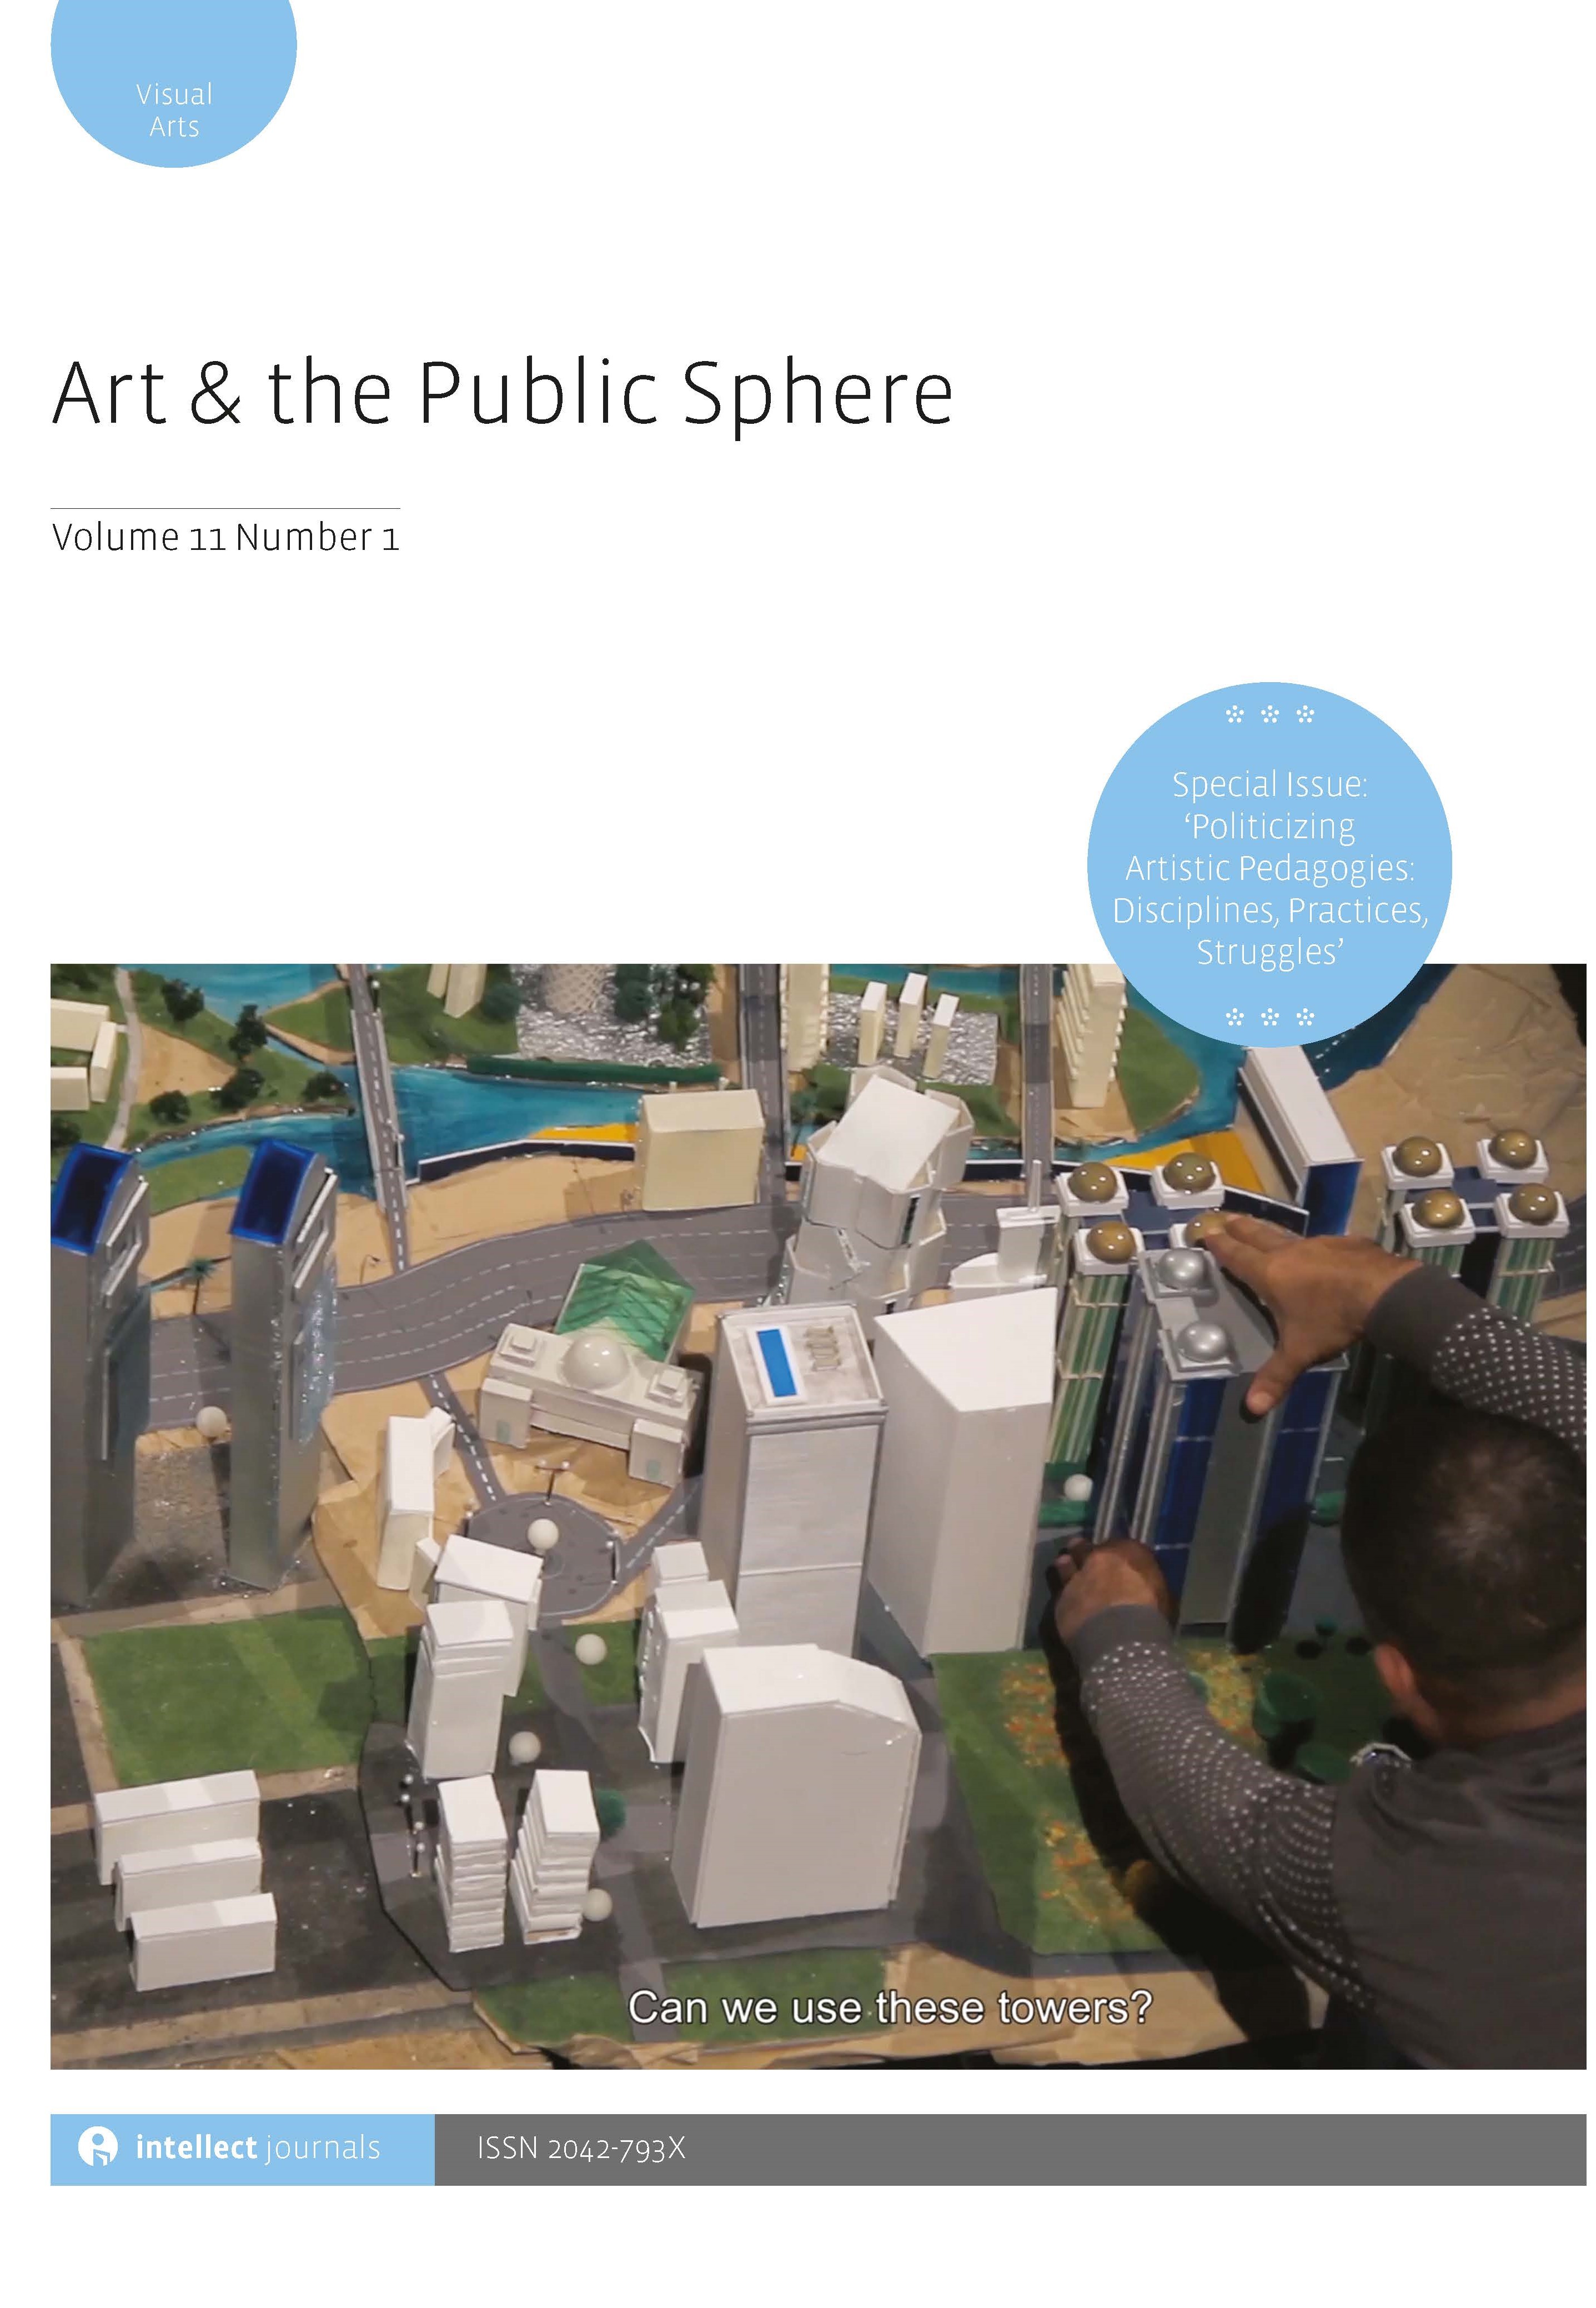 Art & the Public Sphere 11.1 is out now! Special Issue